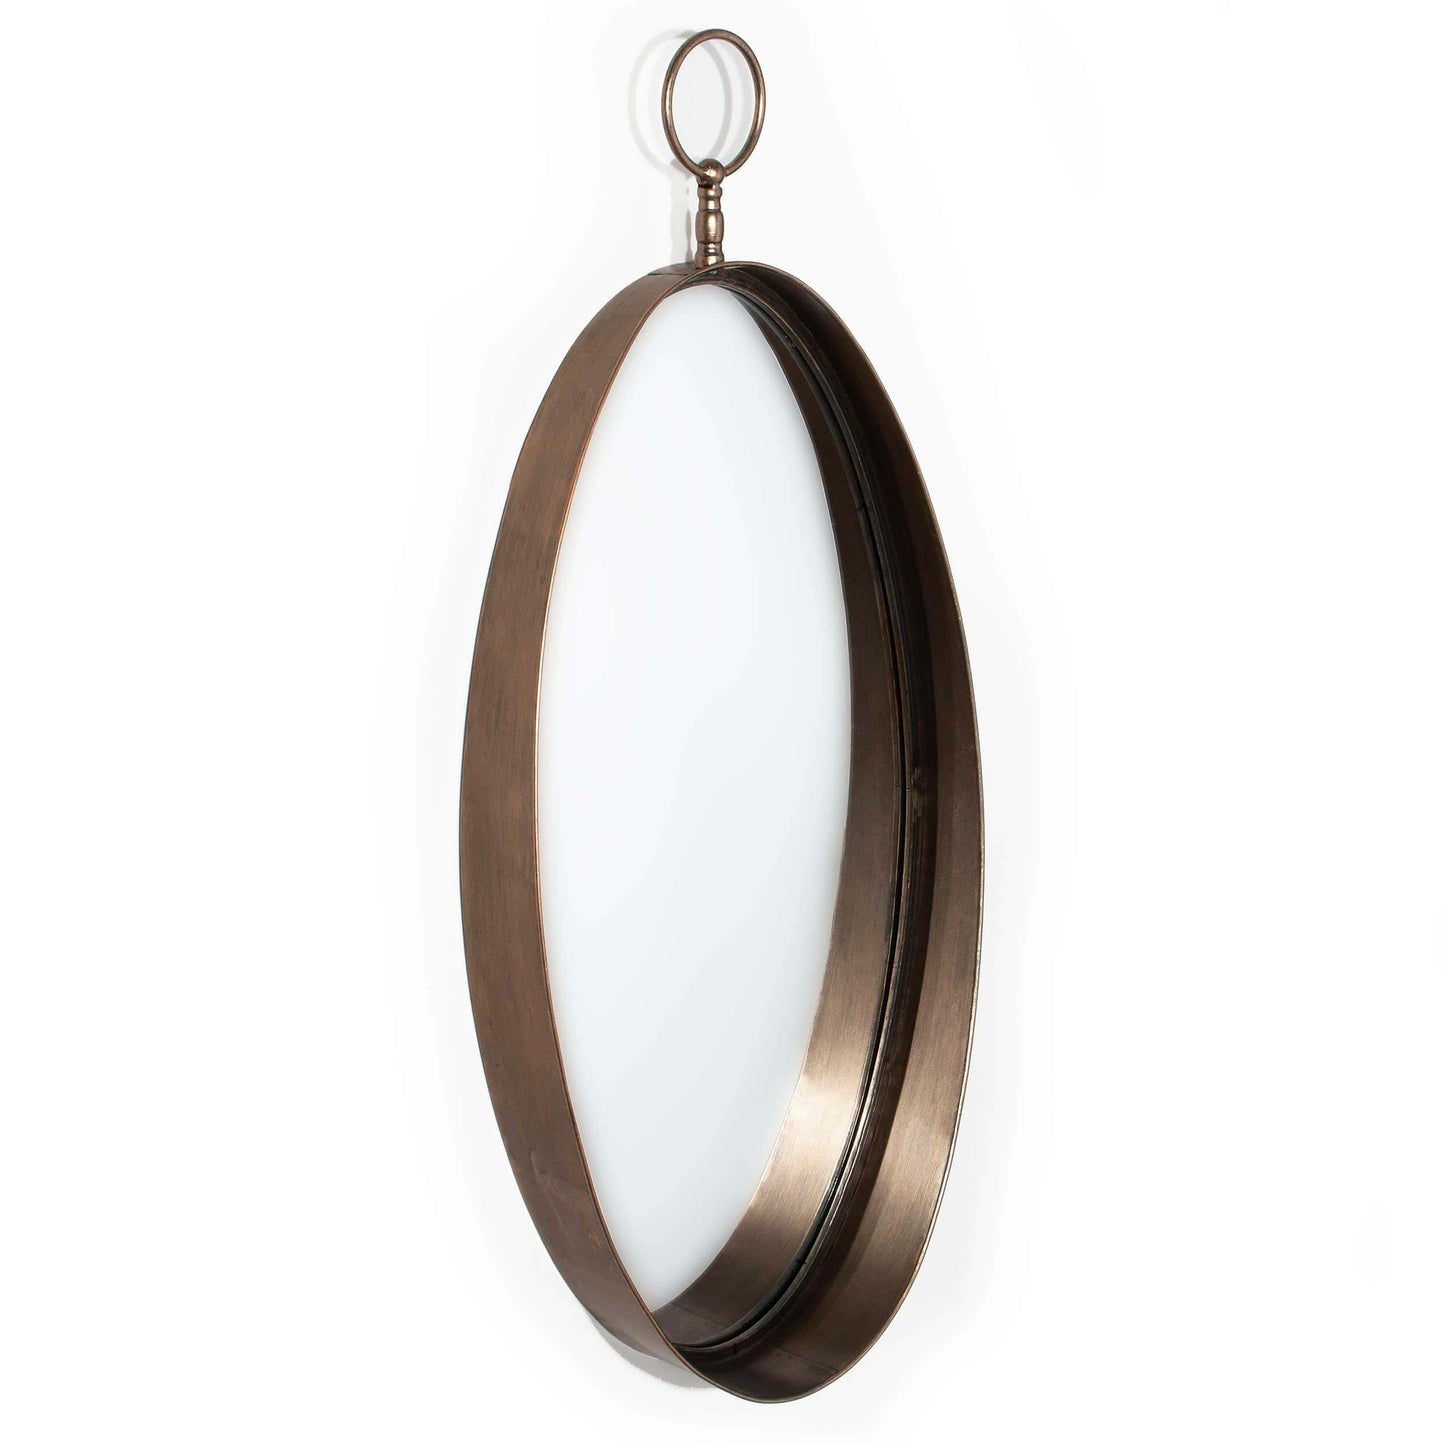 Elegant full-length view of the Macklin oval mirror with a decorative top loop and a sleek, distressed bronze frame against a white background.